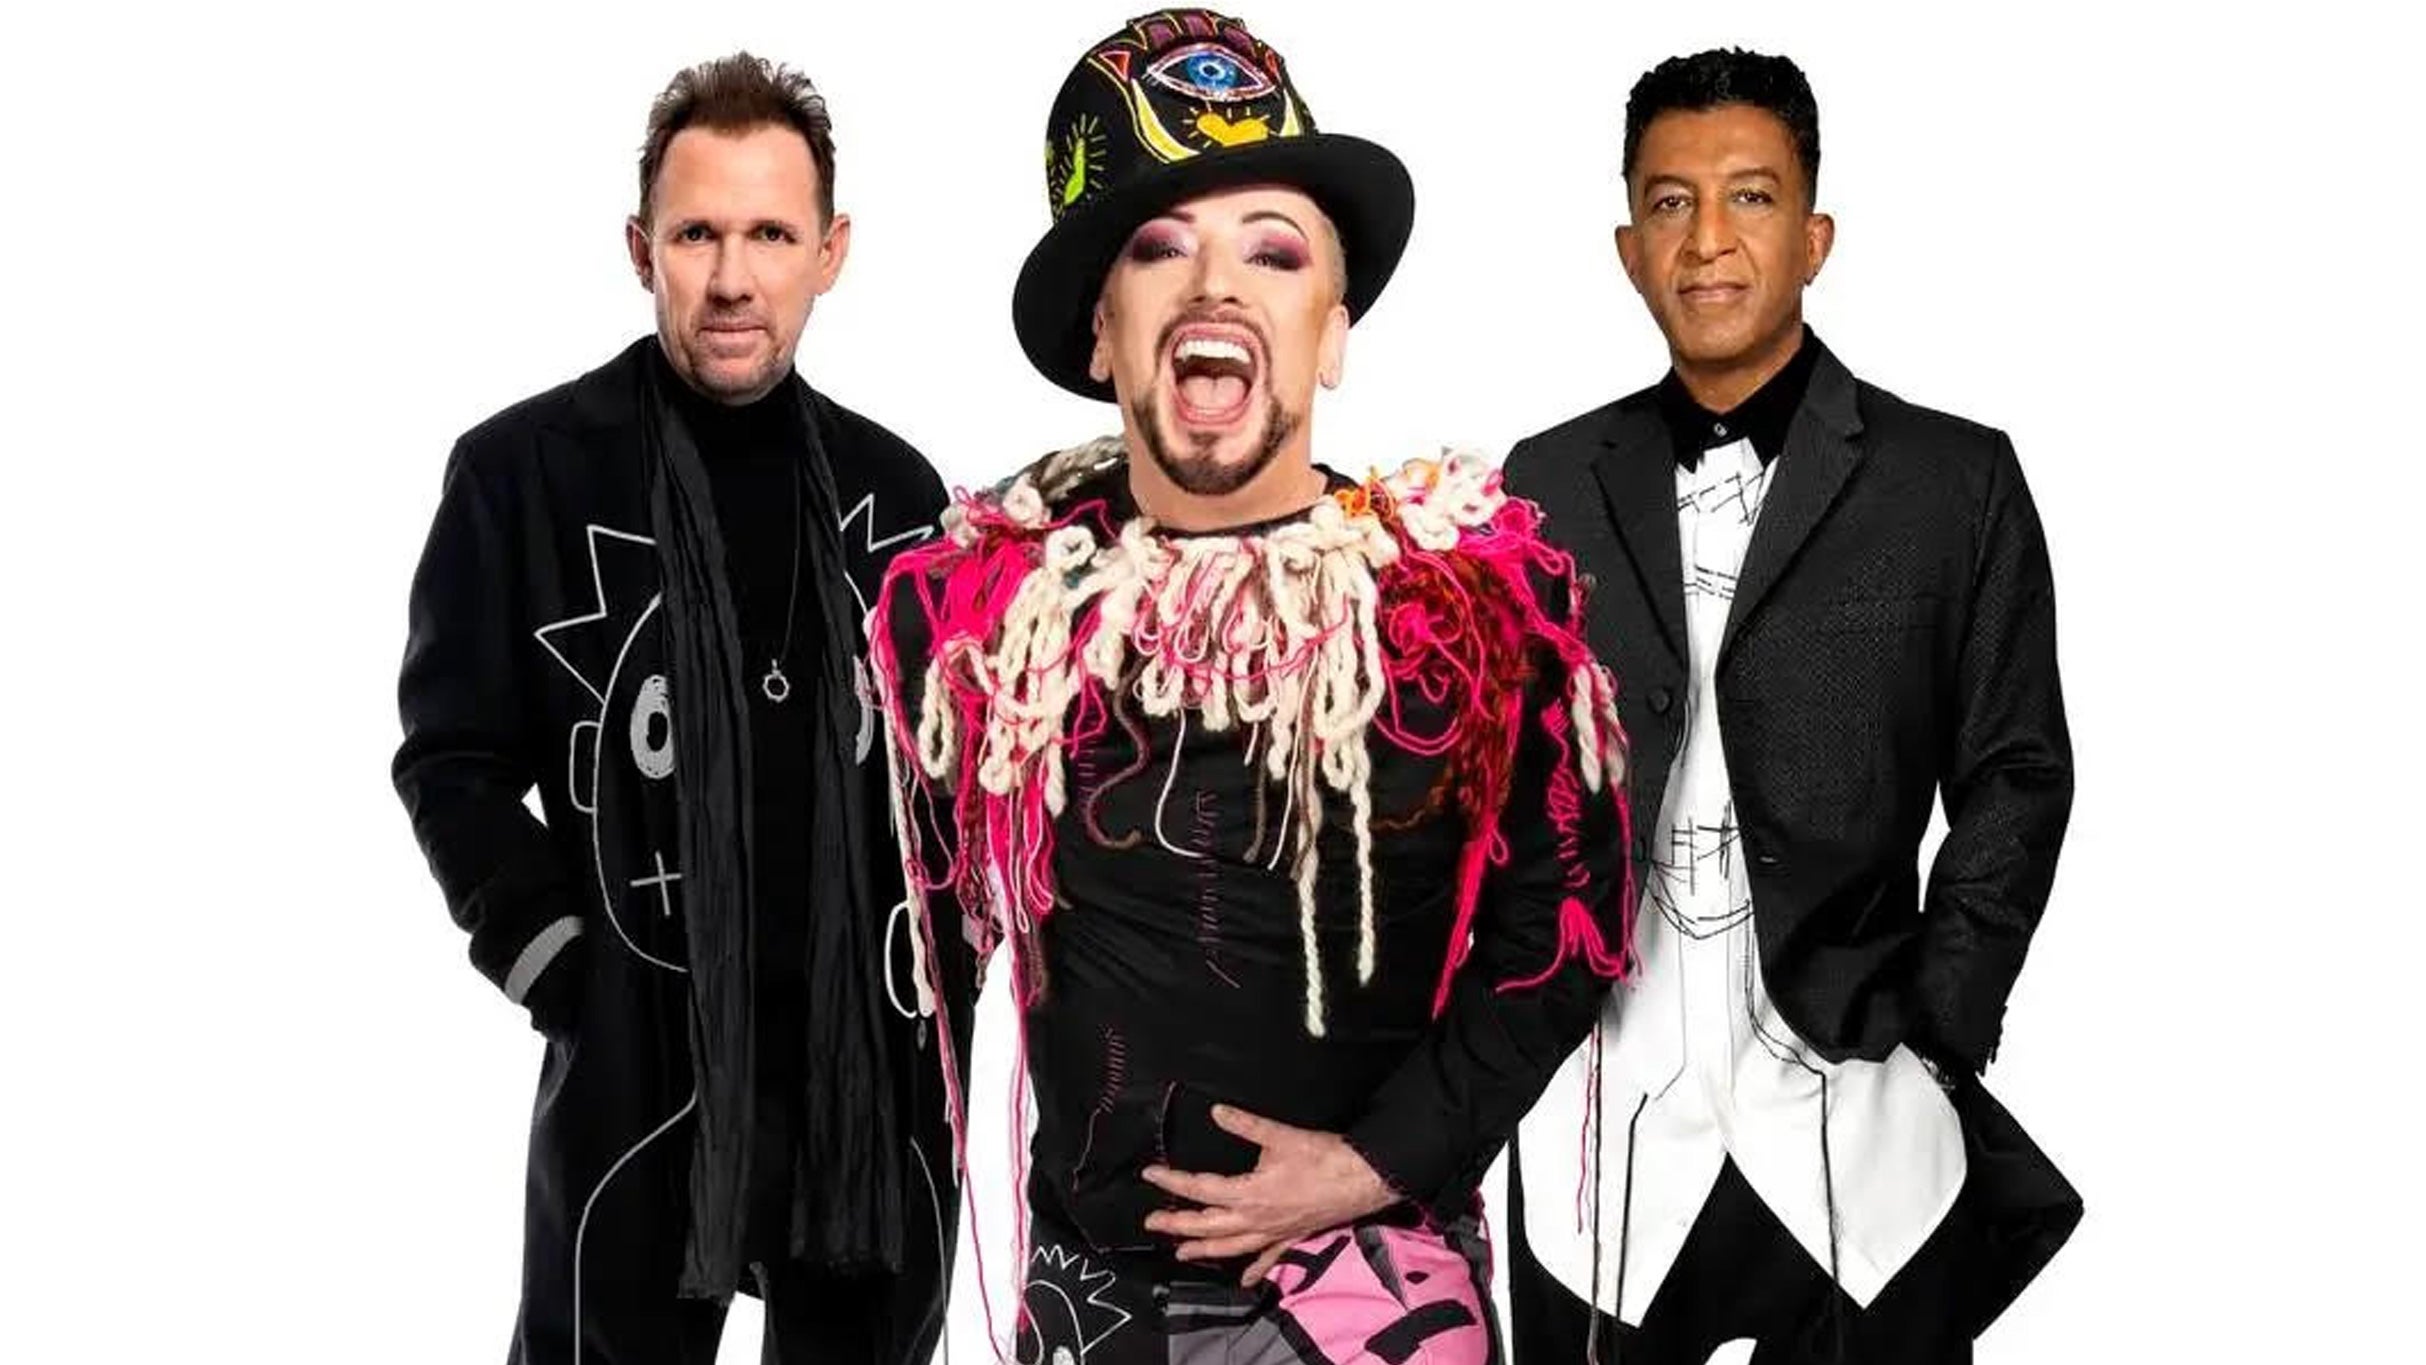 Boy George & Culture Club: The Letting It Go Show in Bristow promo photo for Citi® Cardmember Preferred presale offer code